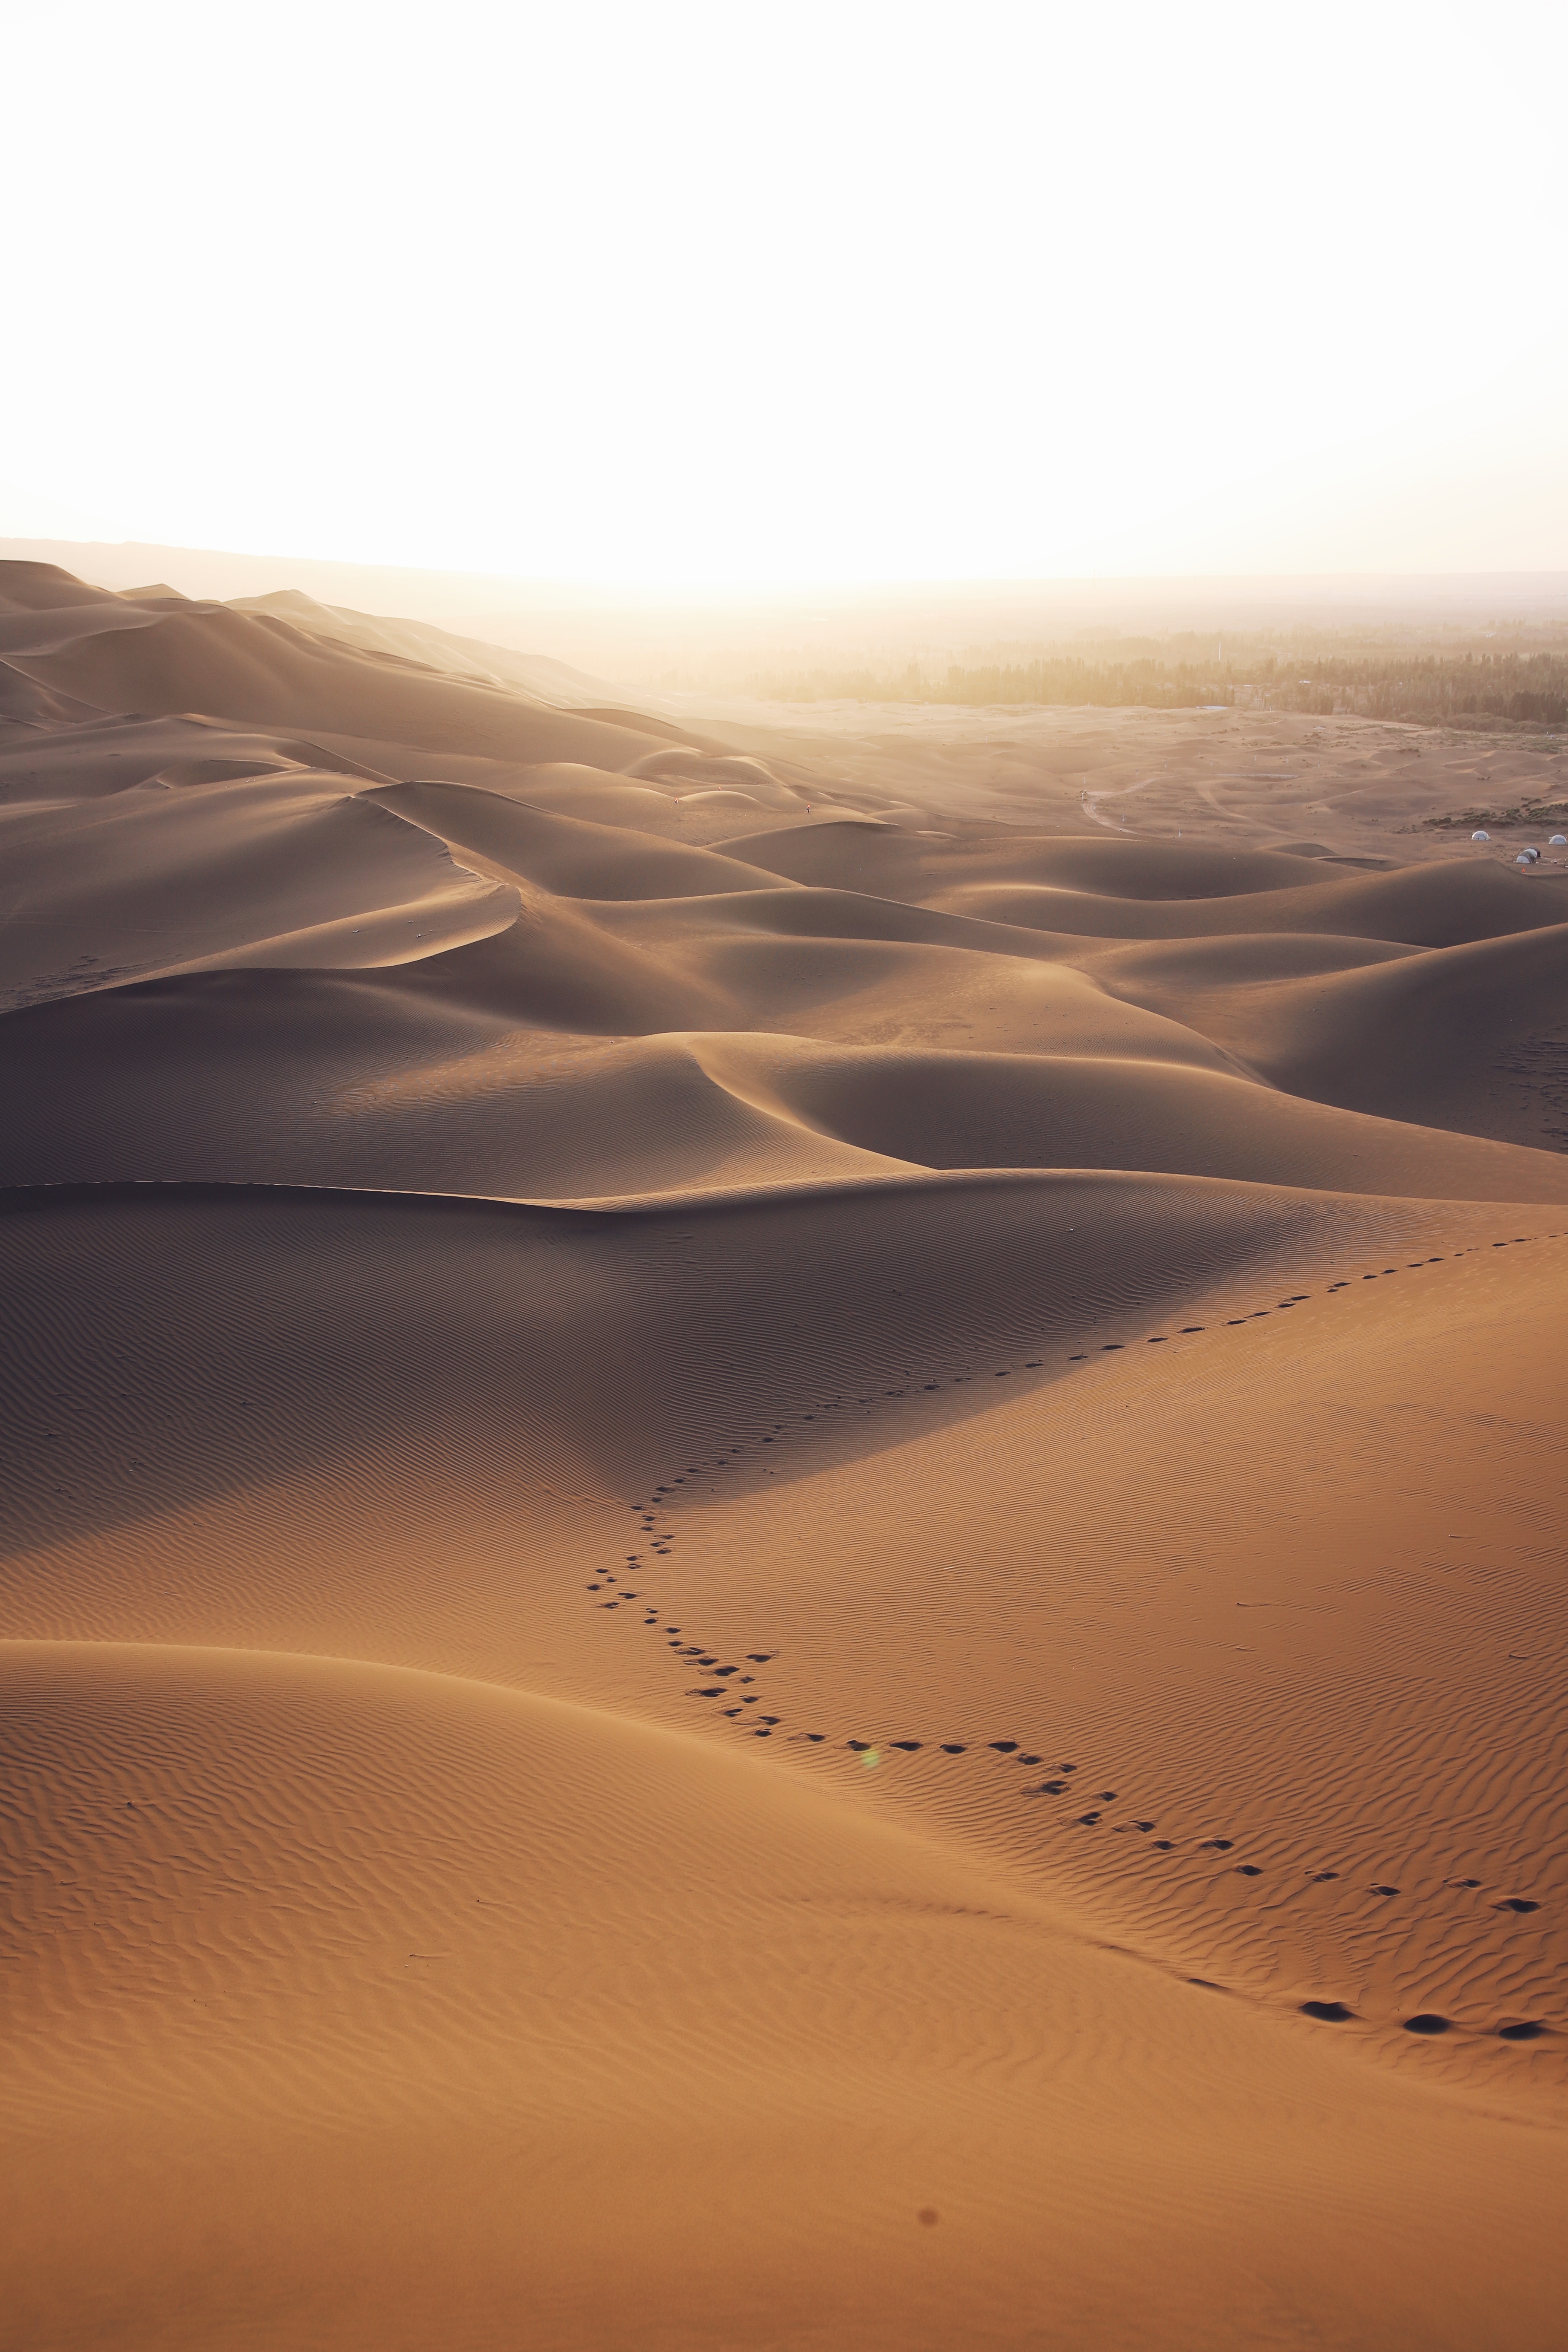 85205 download wallpaper sand, landscape, nature, desert, traces, dunes, links screensavers and pictures for free